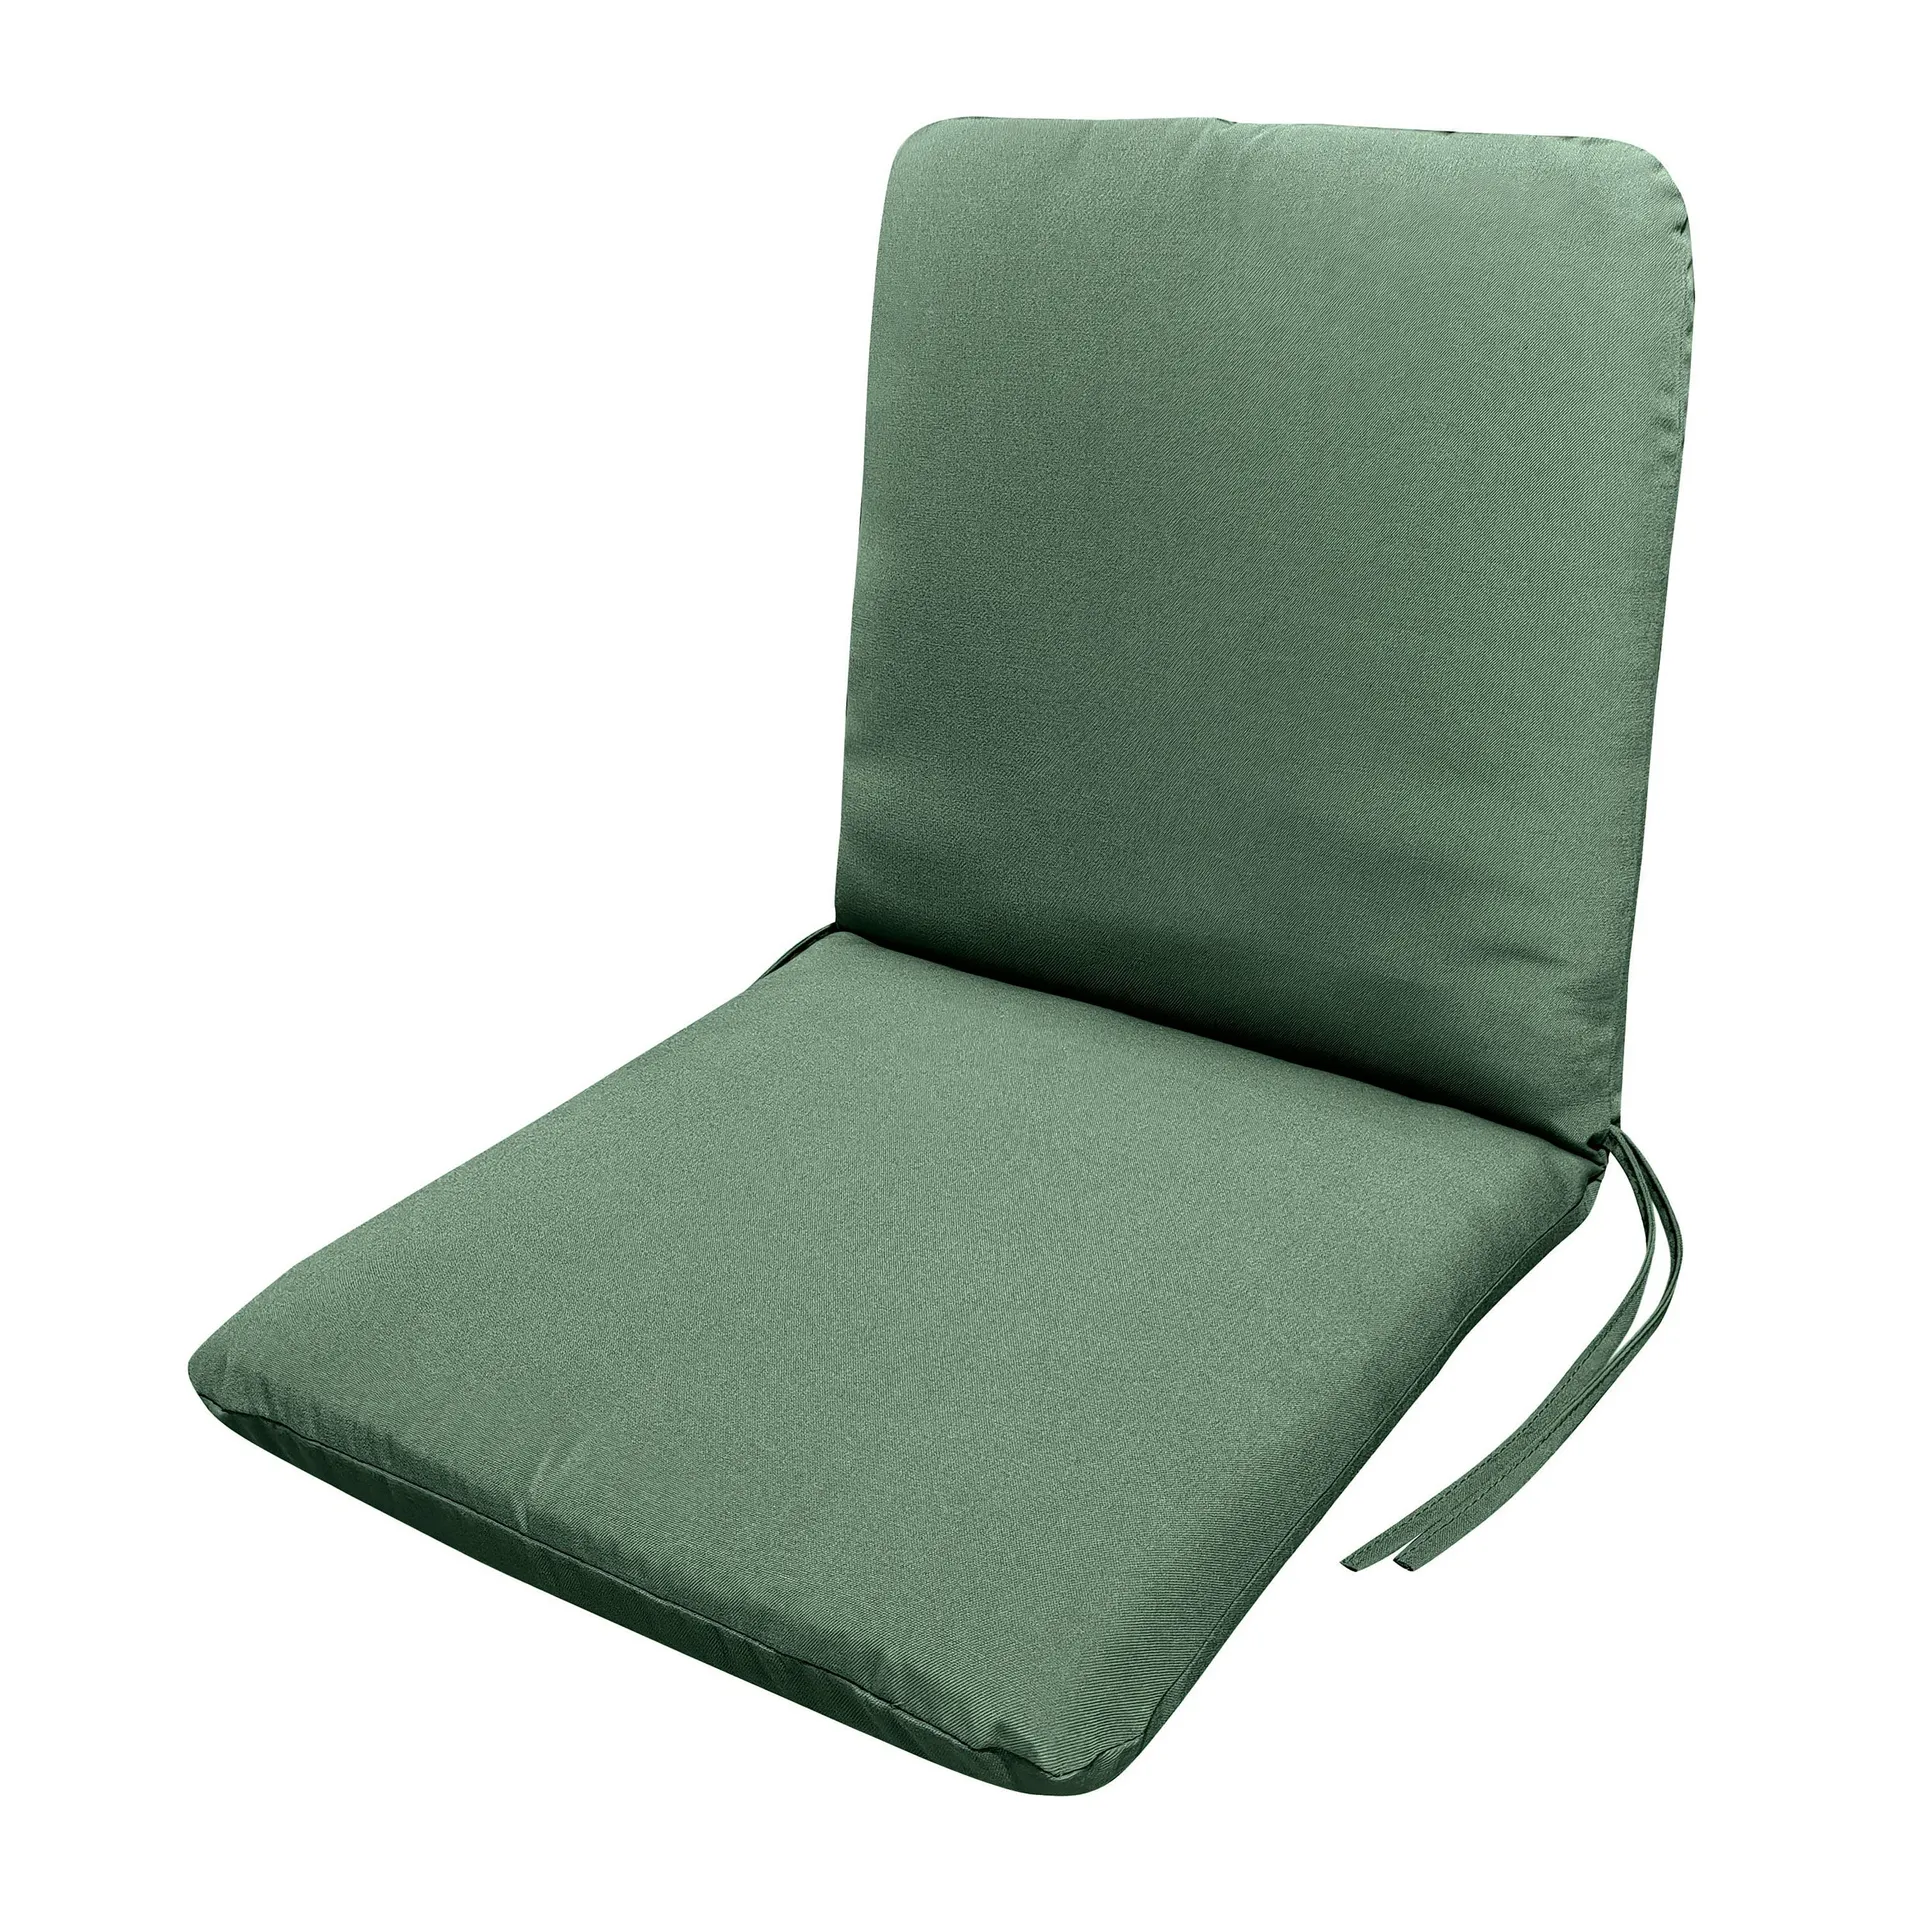 Classic Hinged Chair Cushion with Ties - Green Lily - 19"